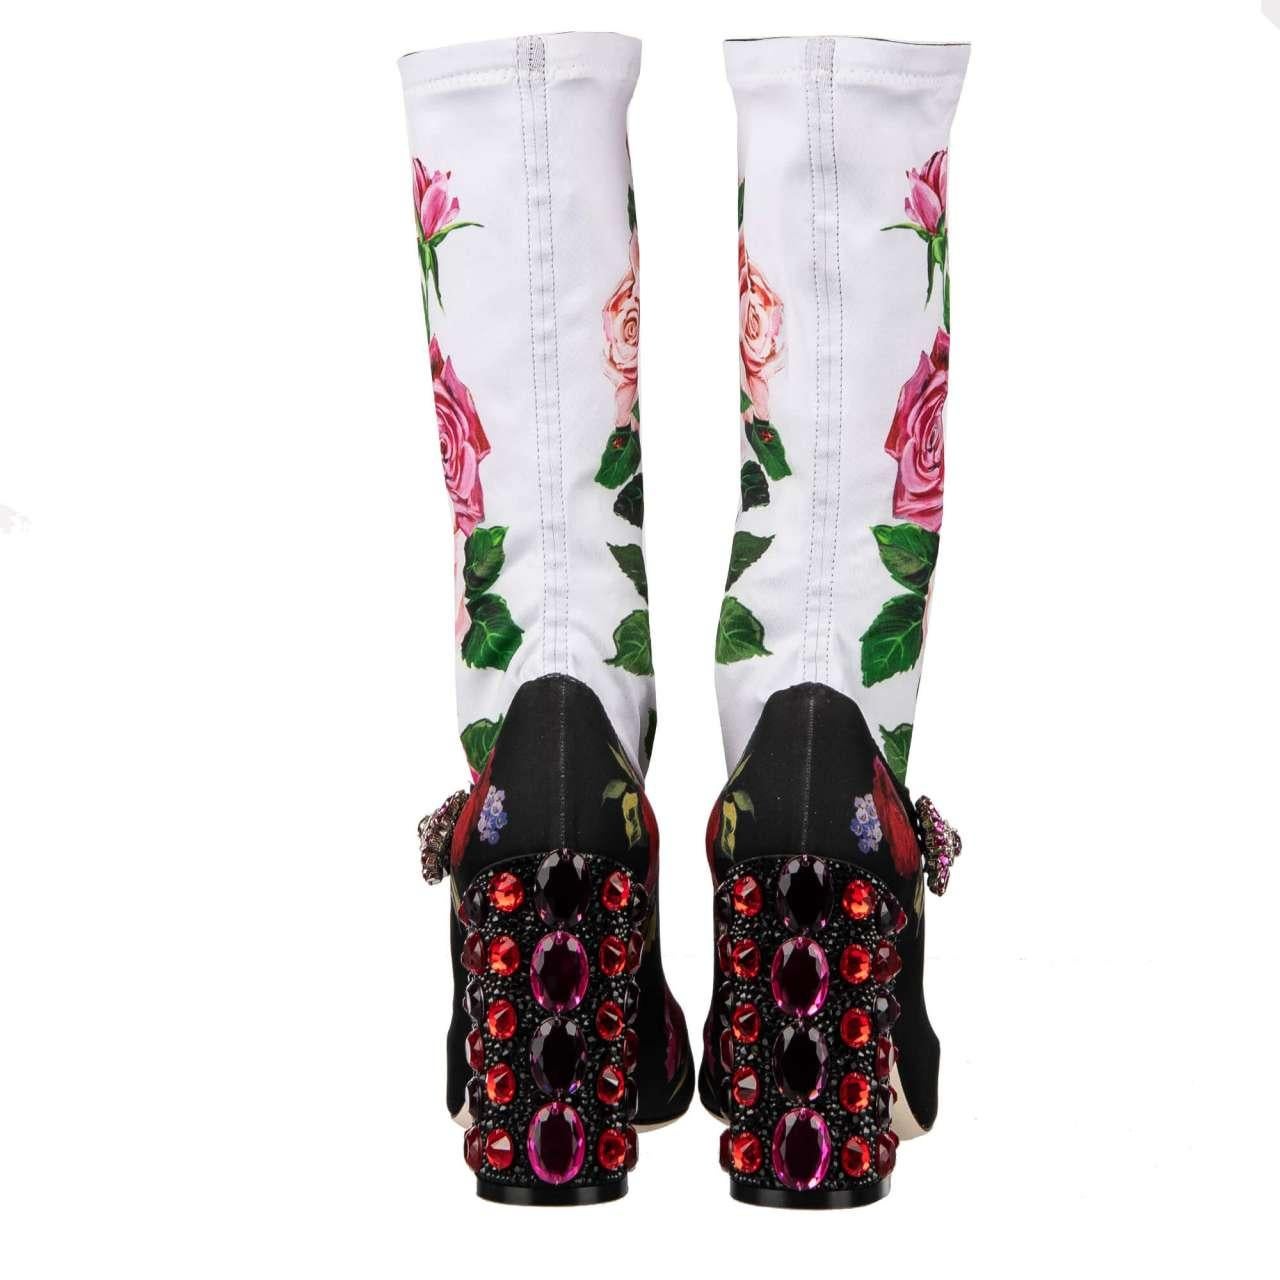 Women's D&G Roses Printed Elastic Socks Pumps VALLY with Crystals Heel Black White 36 For Sale